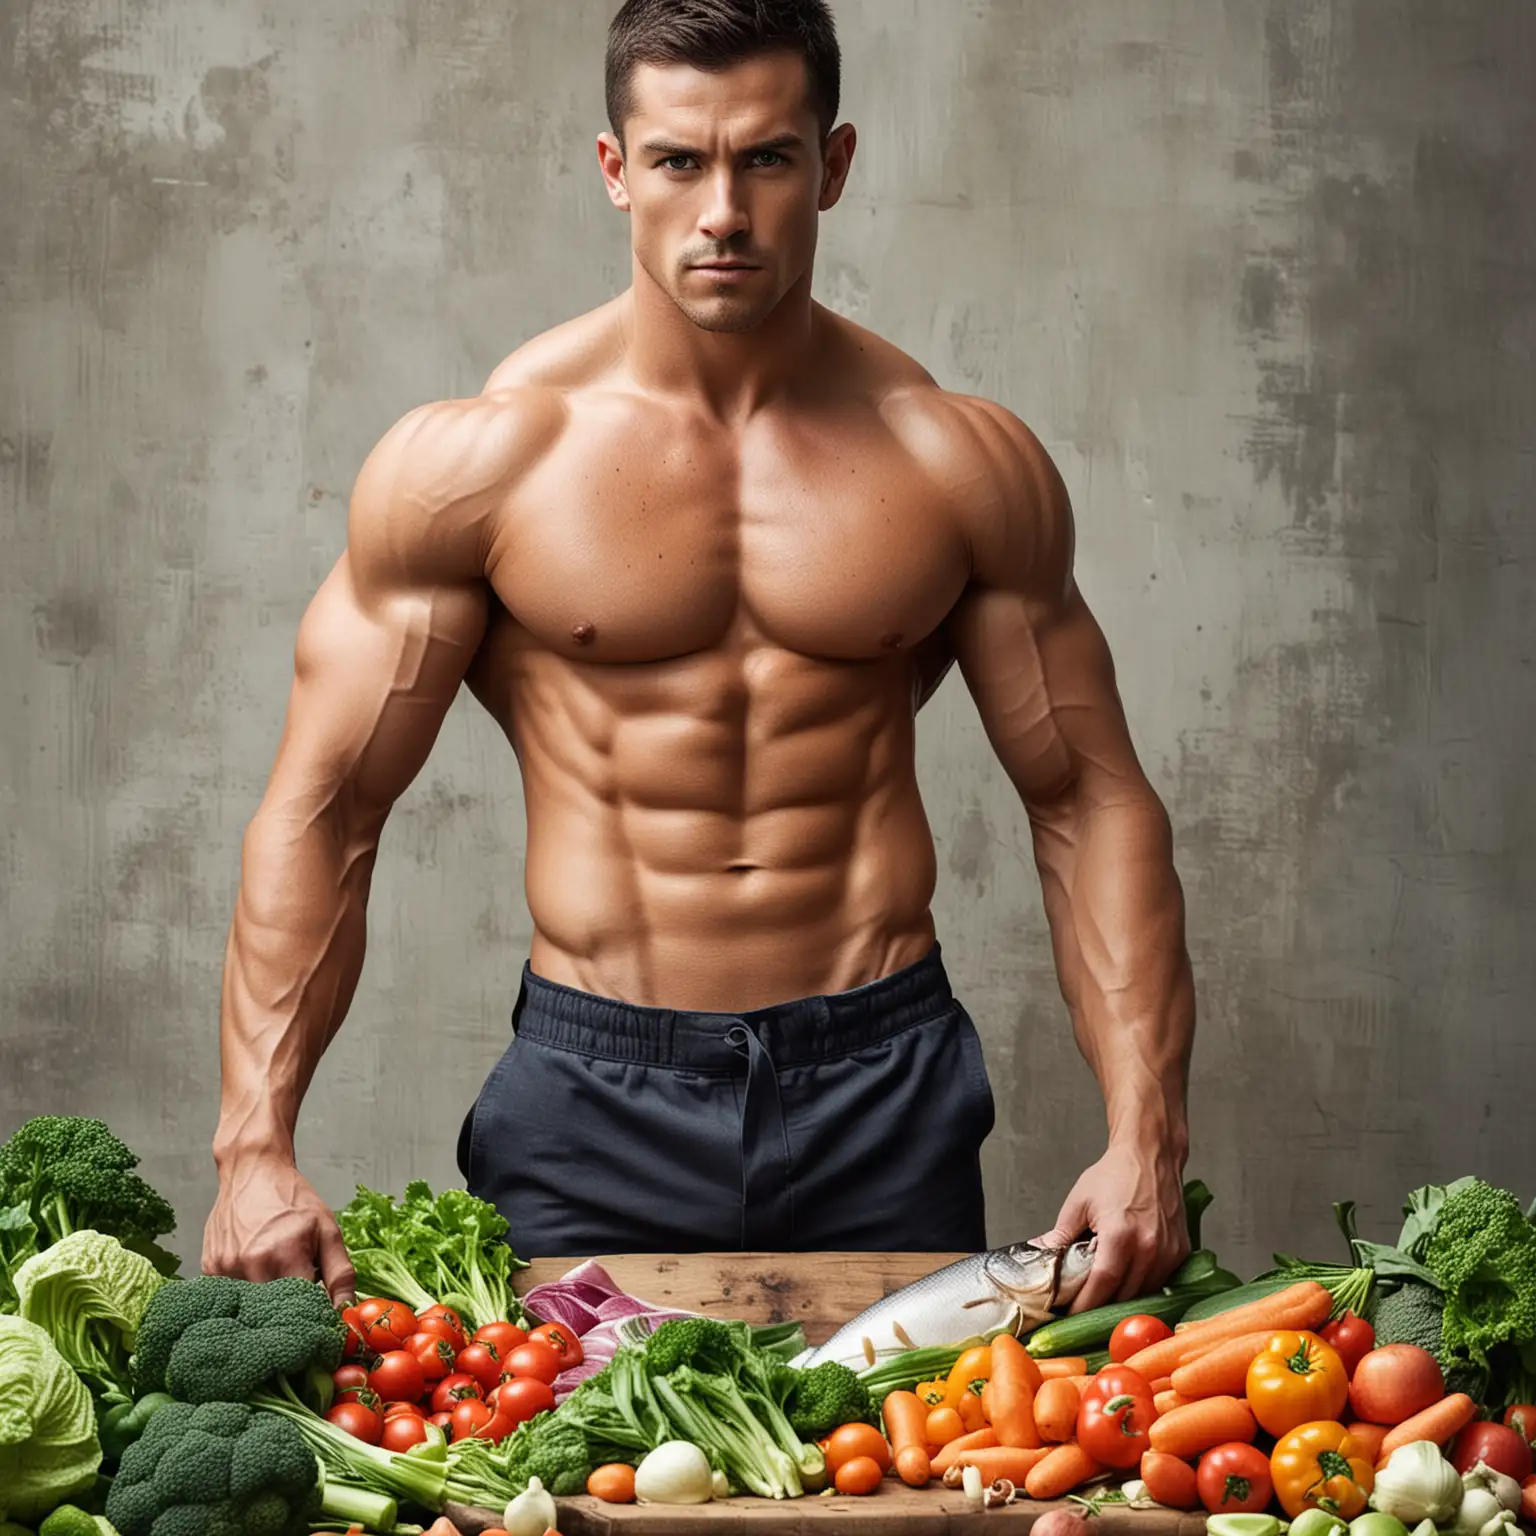 Muscular-Warrior-Cooking-Preparing-Vegetables-and-Fish